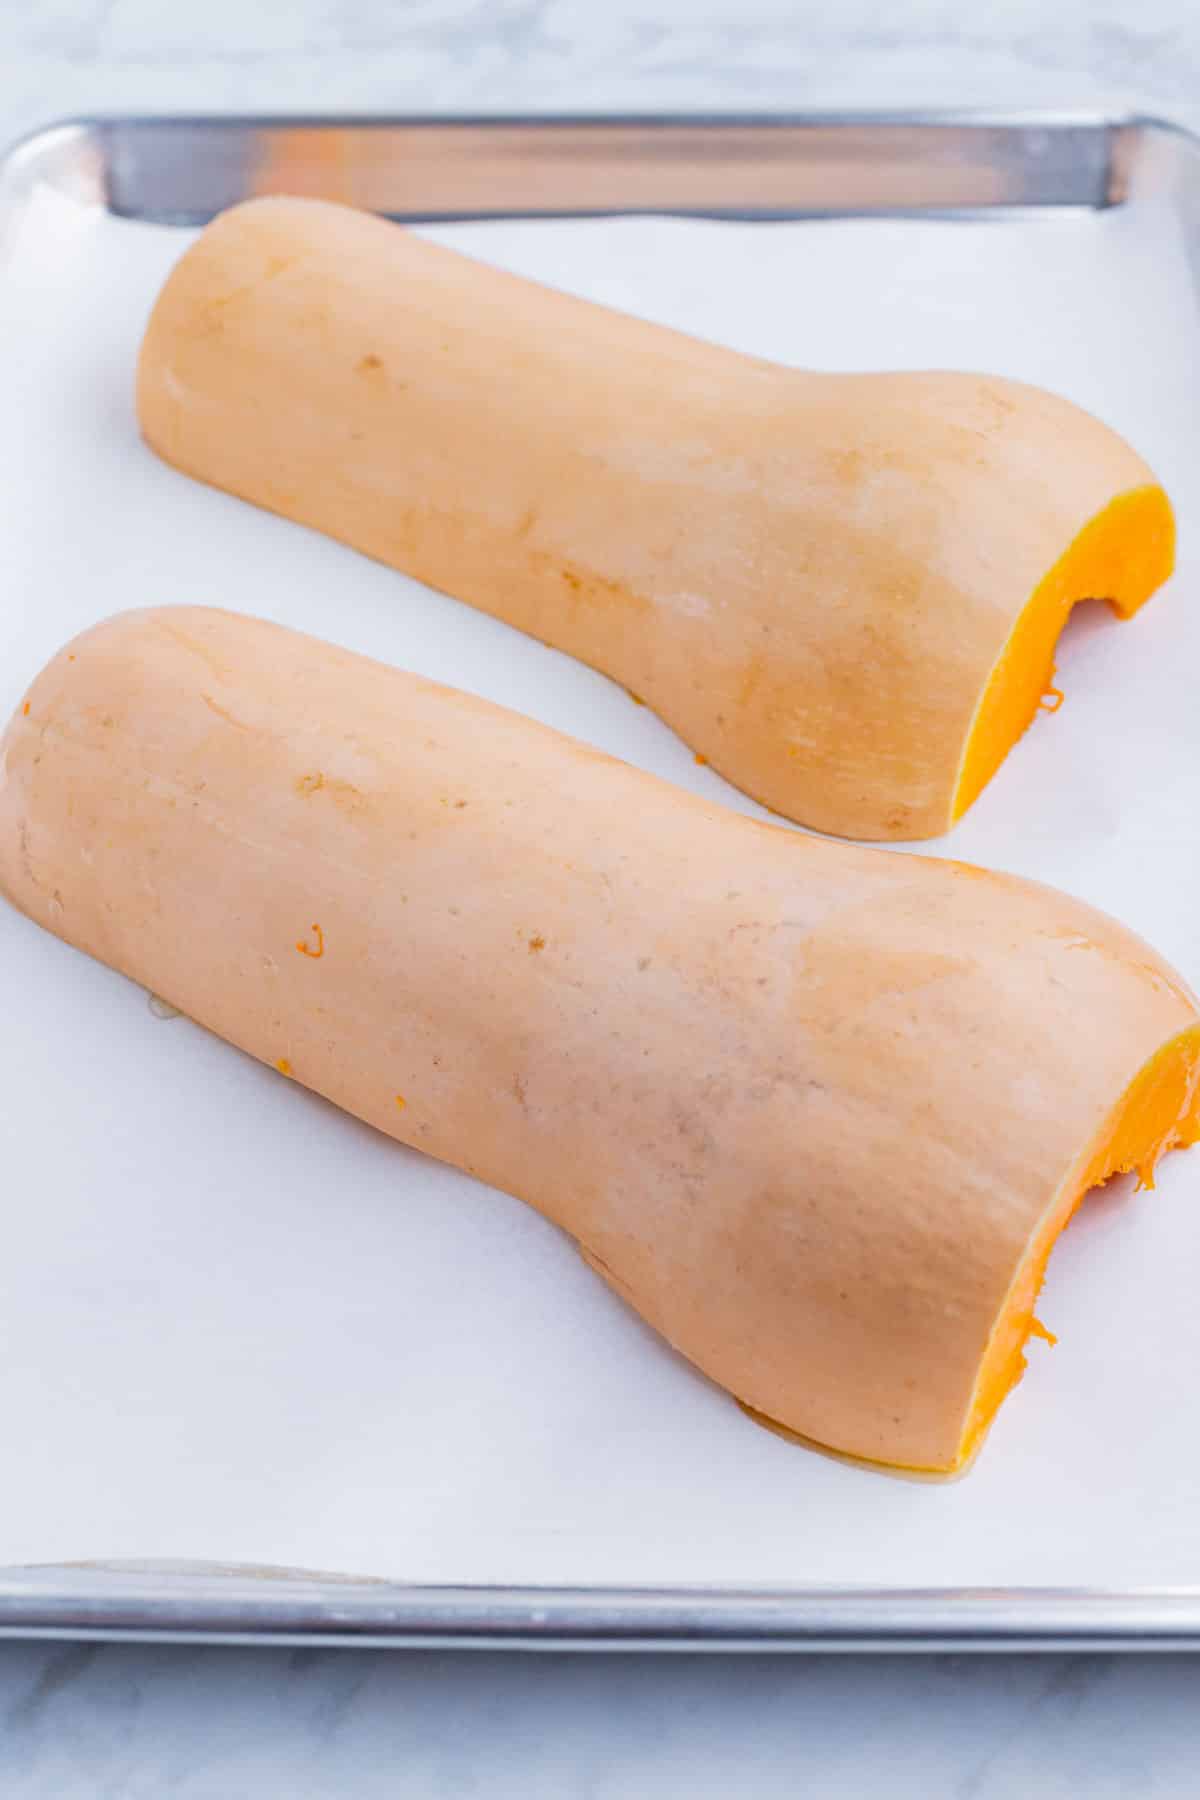 The butternut squash is roasted cut side down.